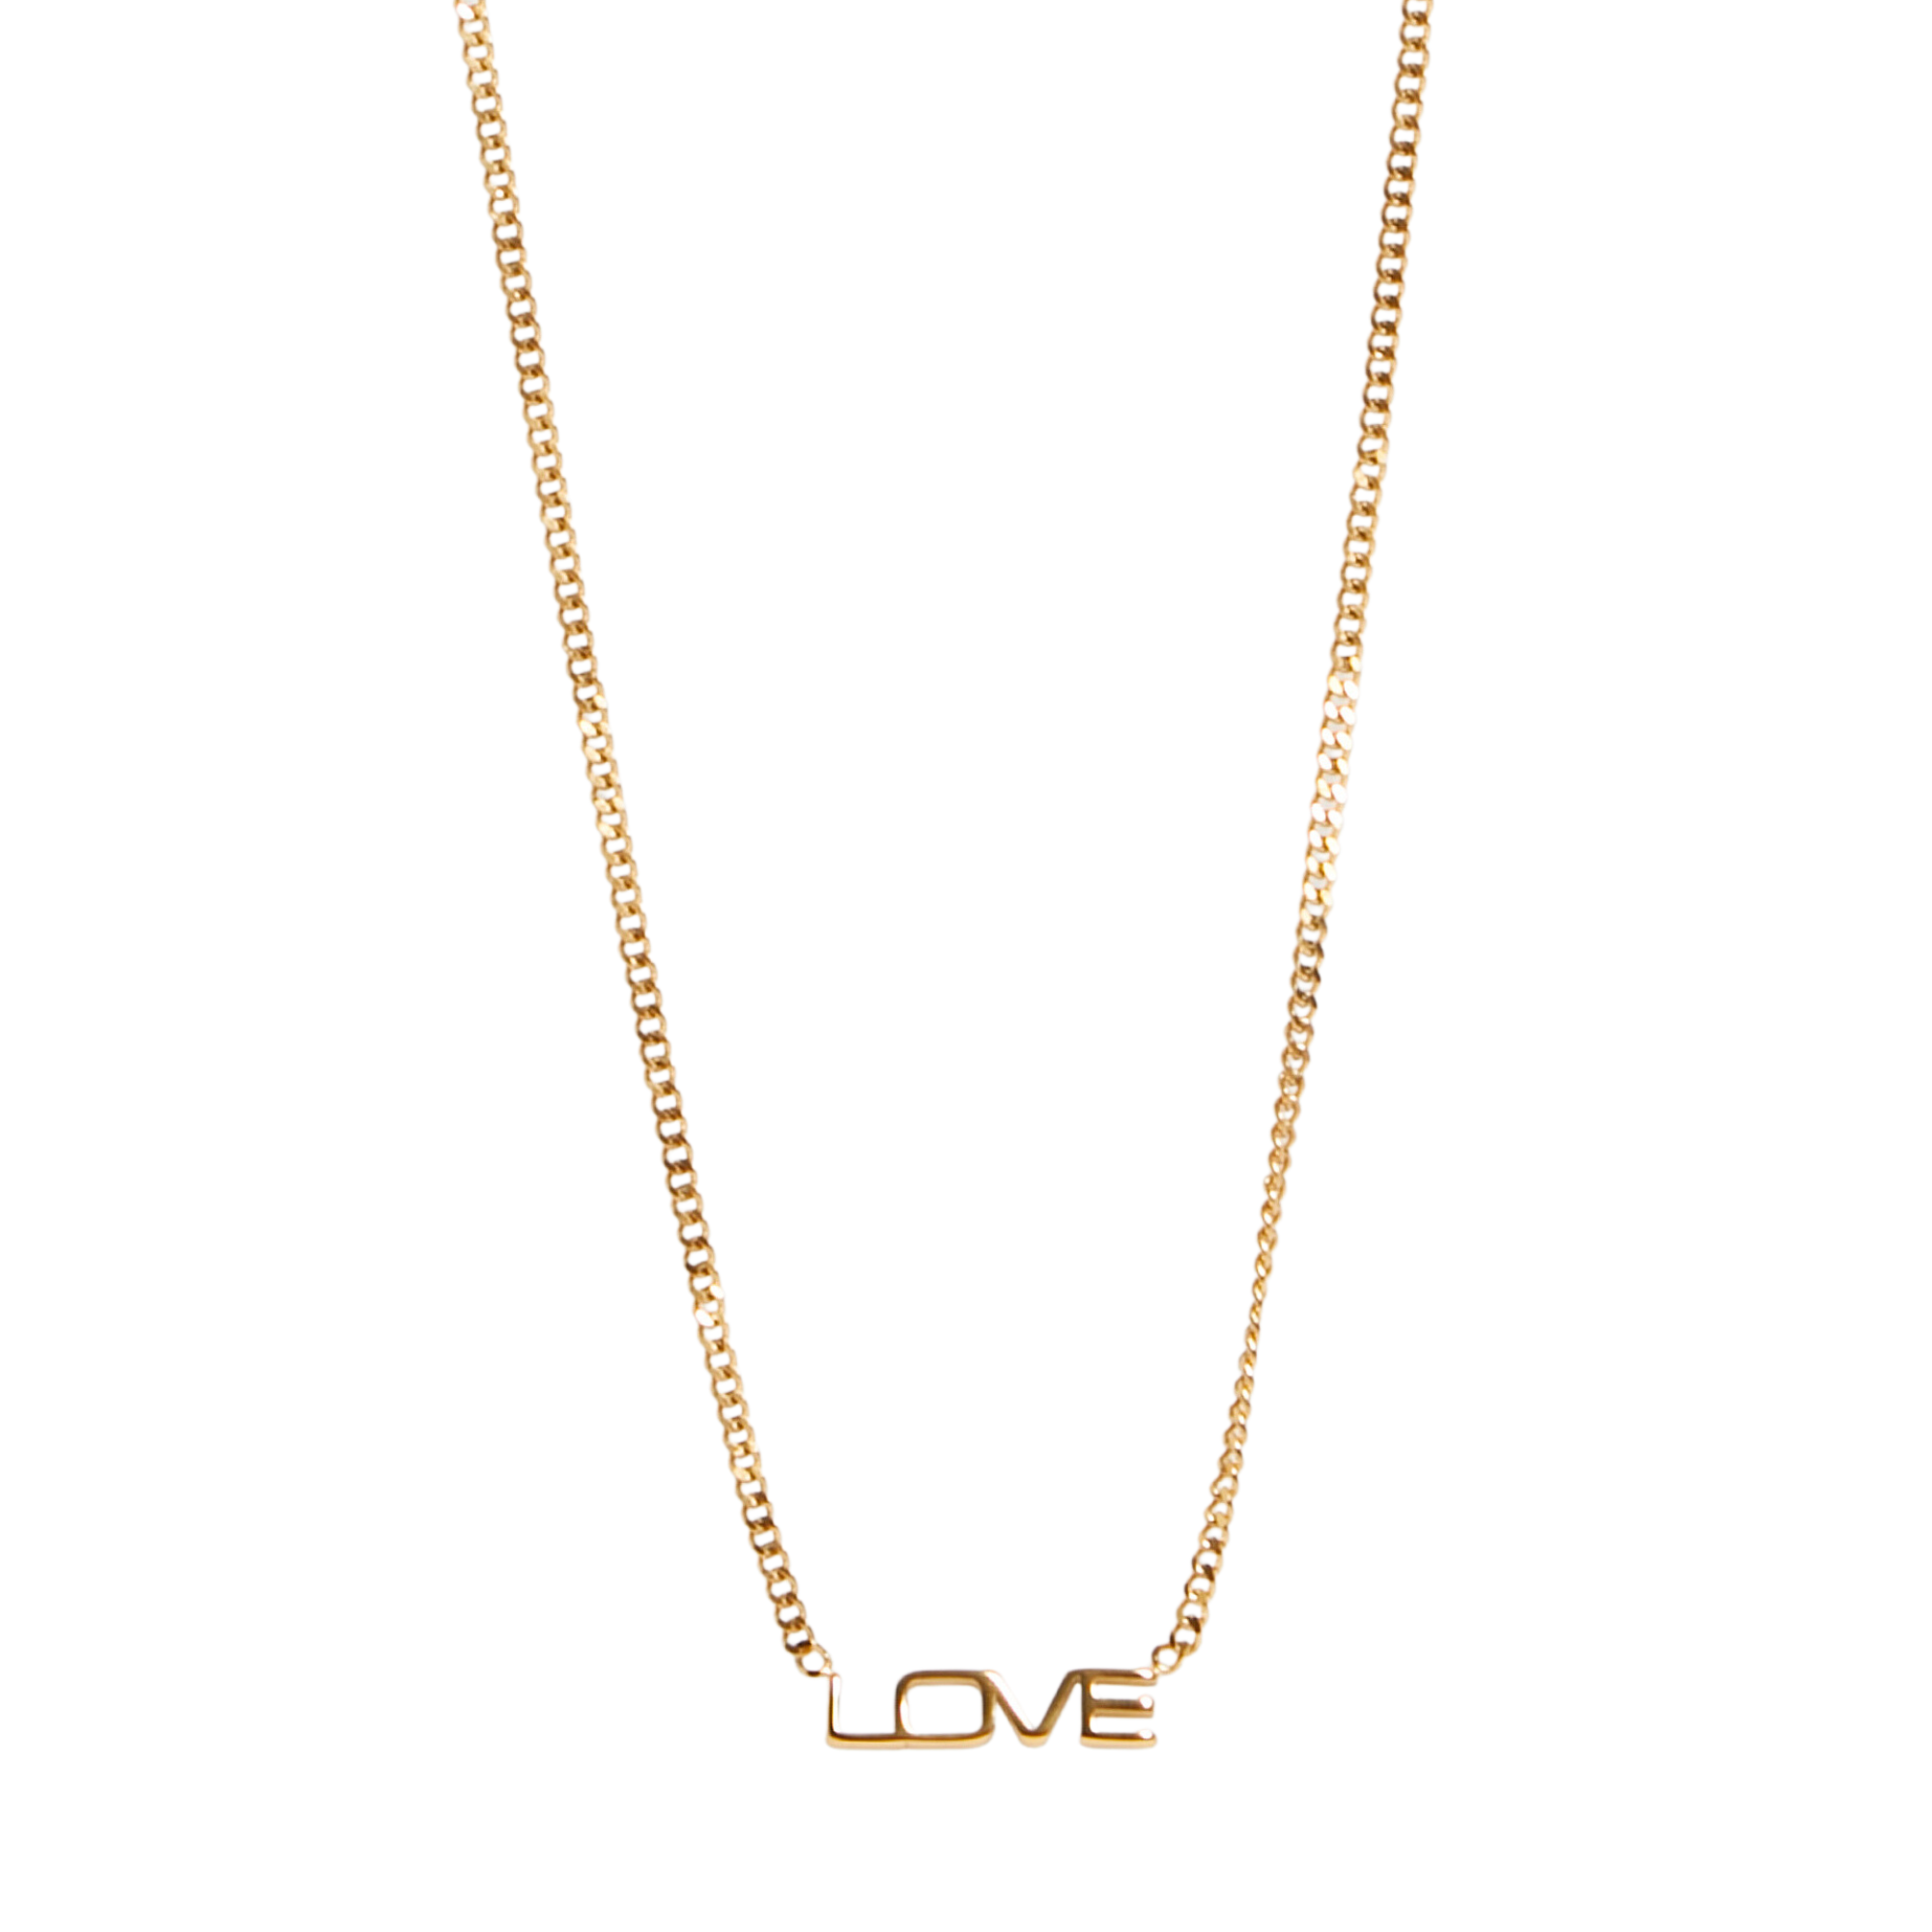 LOVE Necklace - Gold